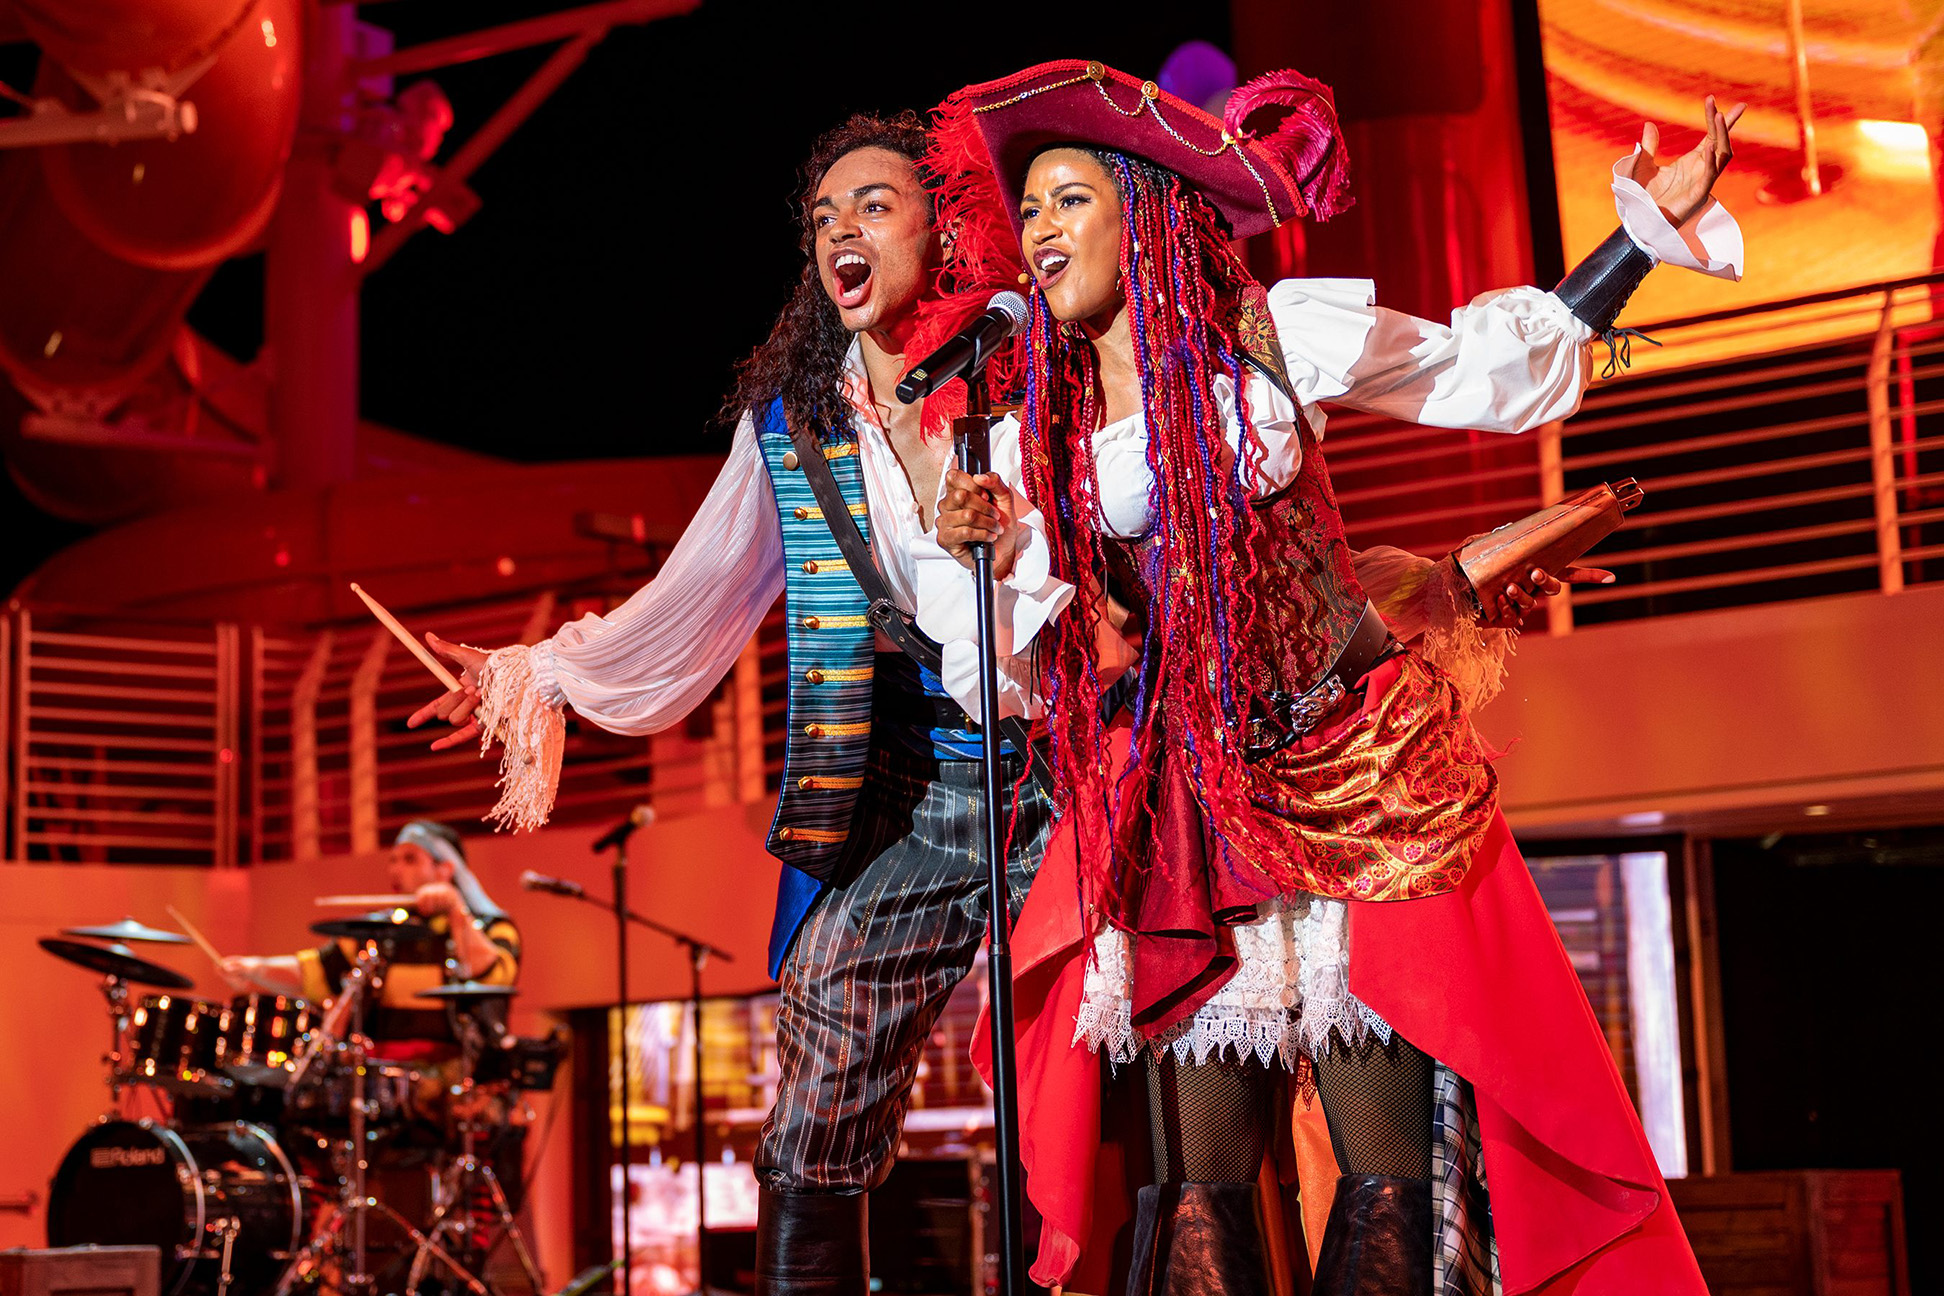 Another signature Disney Cruise Line nighttime deck celebration, Pirate’s Rockin’ Parlay Party, returns aboard the Disney Treasure. On one special night of every voyage, guests of all ages can don their most swashbuckling pirate garb and head to the upper decks for a rollicking rock-and-roll extravaganza, complete with fireworks at sea like only Disney can do. (Matt Stroshane, photographer)